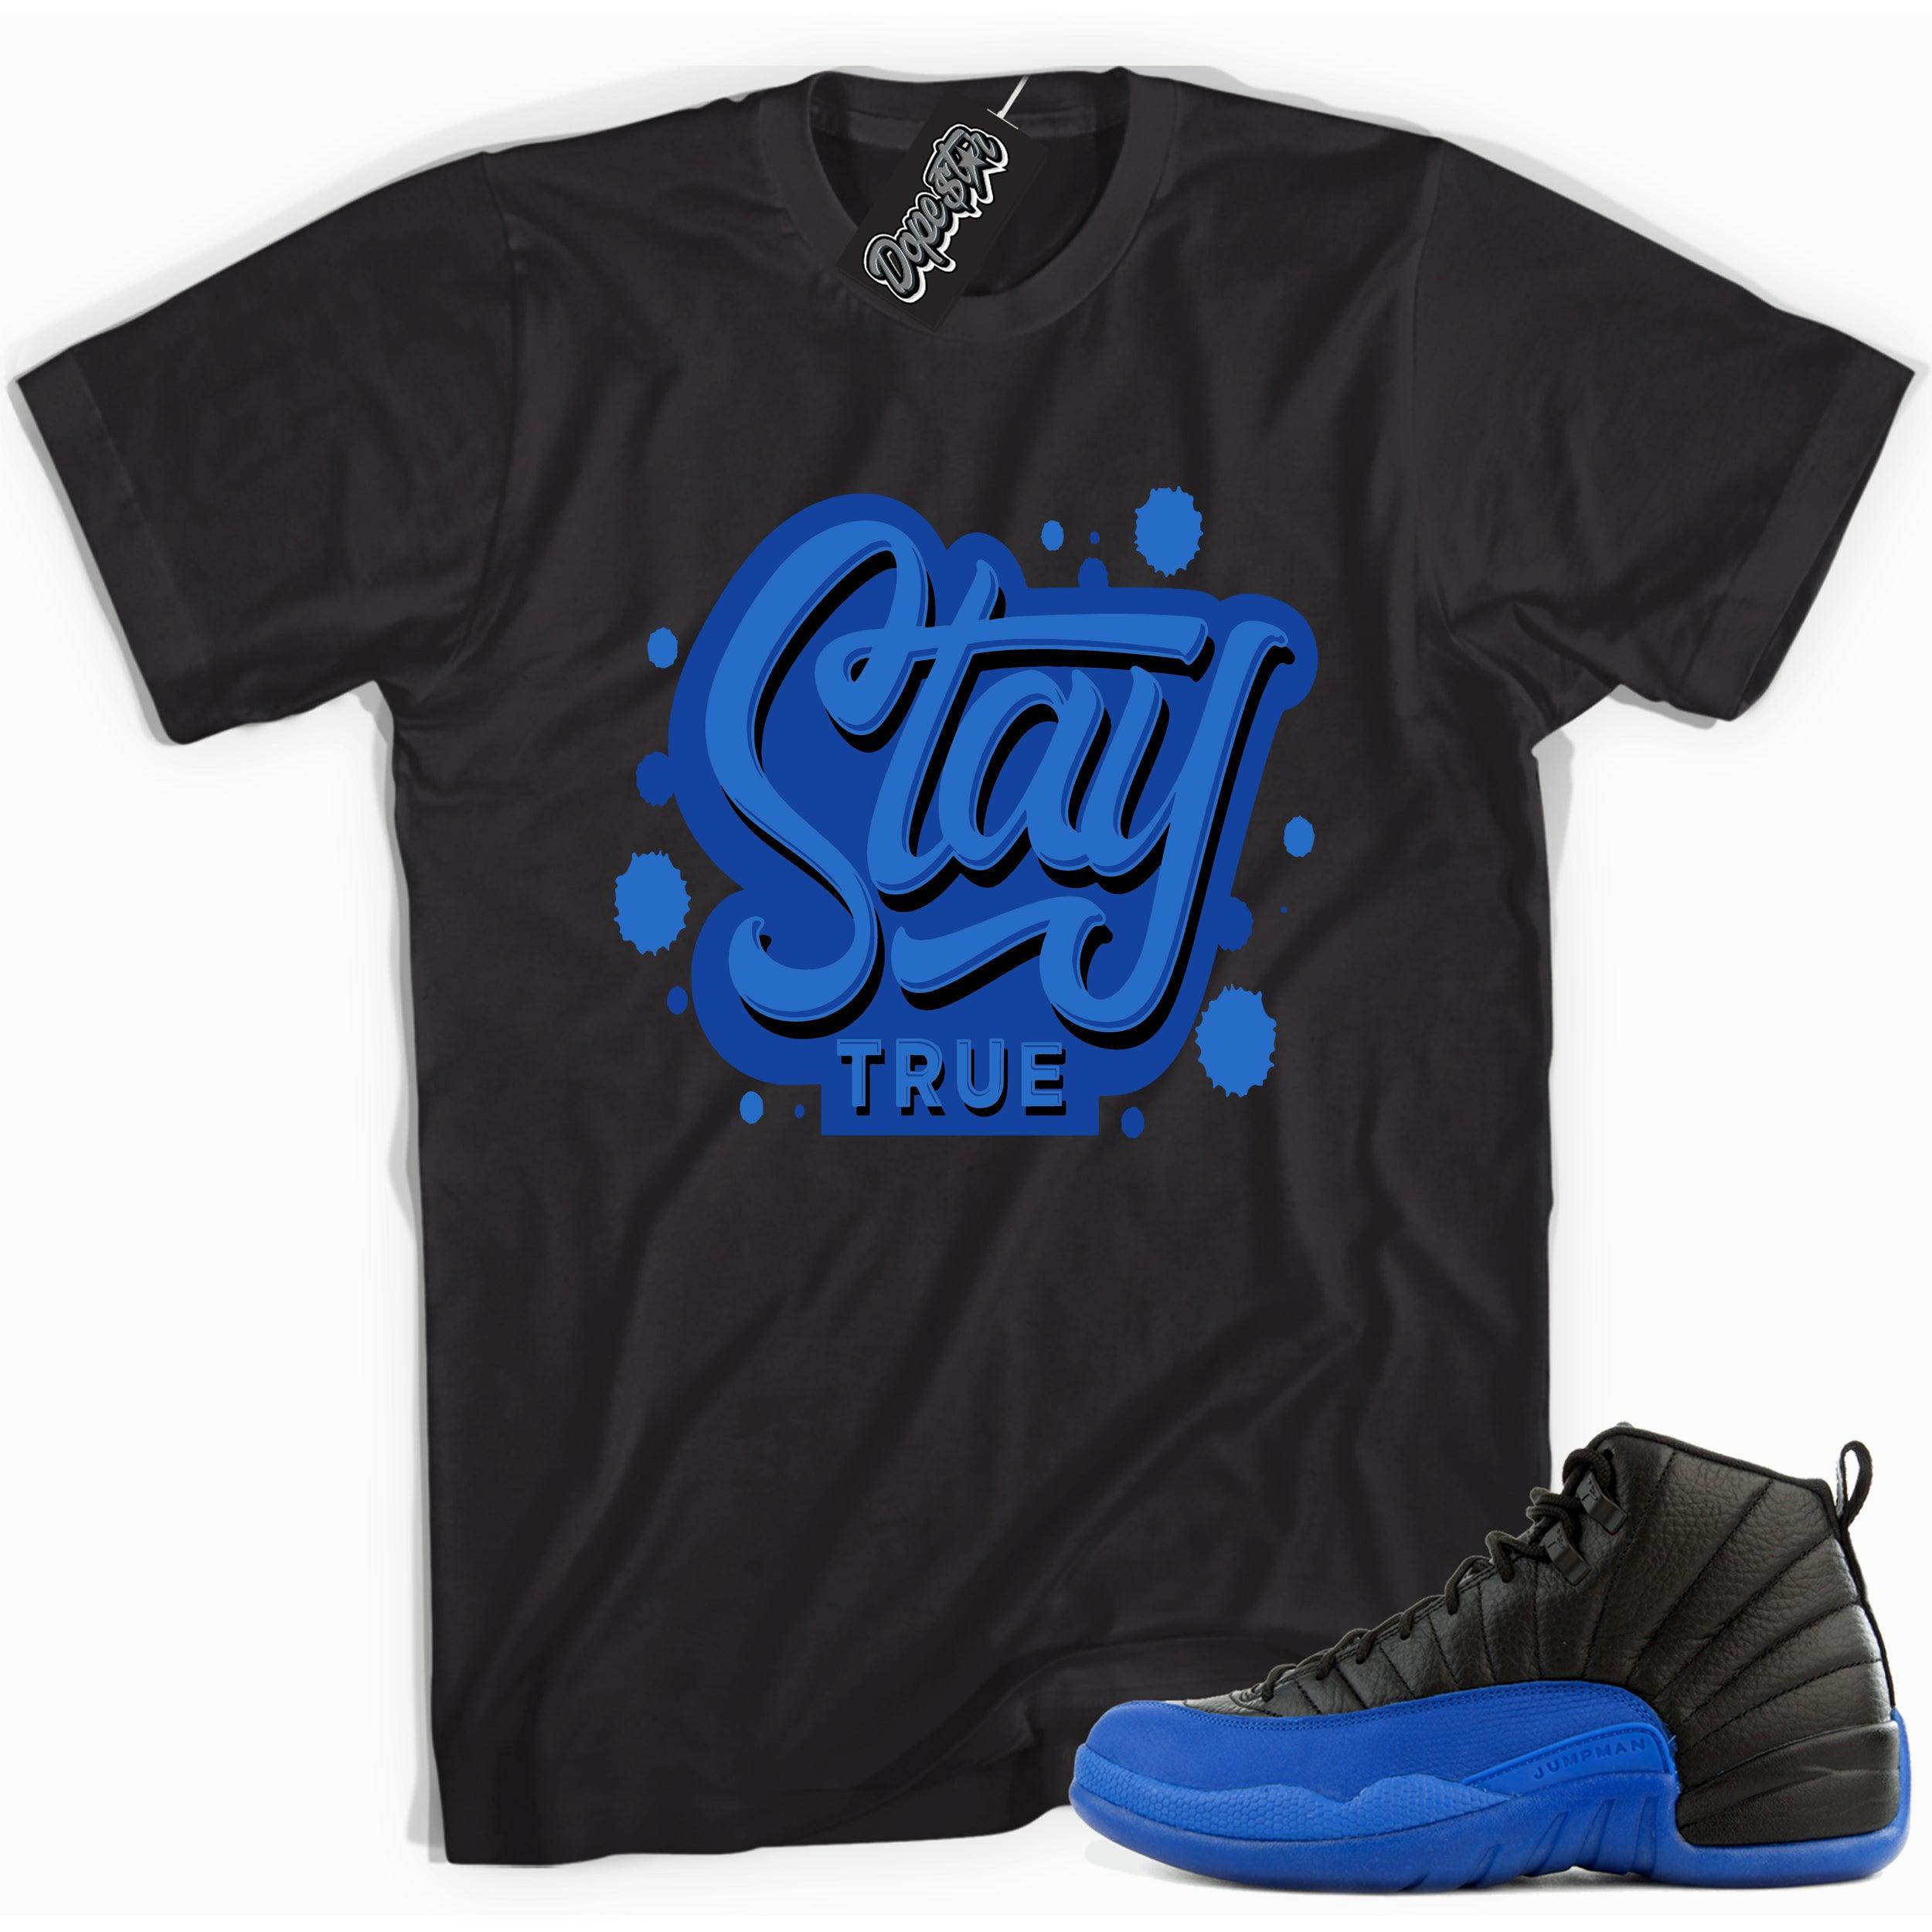 Cool black graphic tee with 'stay true' print, that perfectly matches  Air Jordan 12 Retro Black Game Royal sneakers.